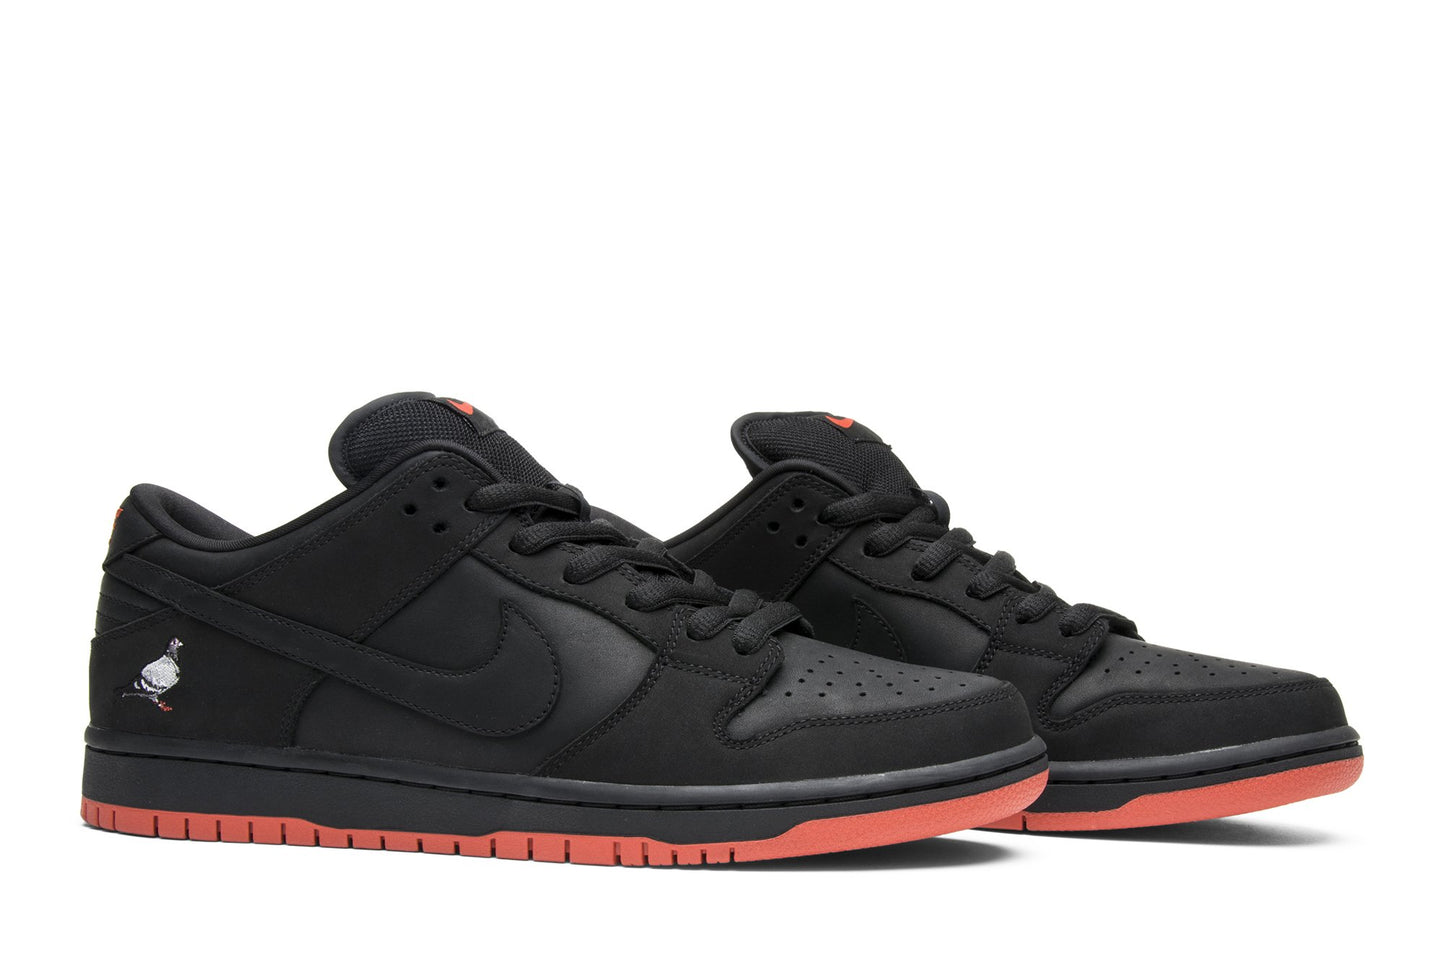 Jeff Staple x Dunk Low Pro SB 'Black Pigeon' Reed Space Exclusive 883232-008